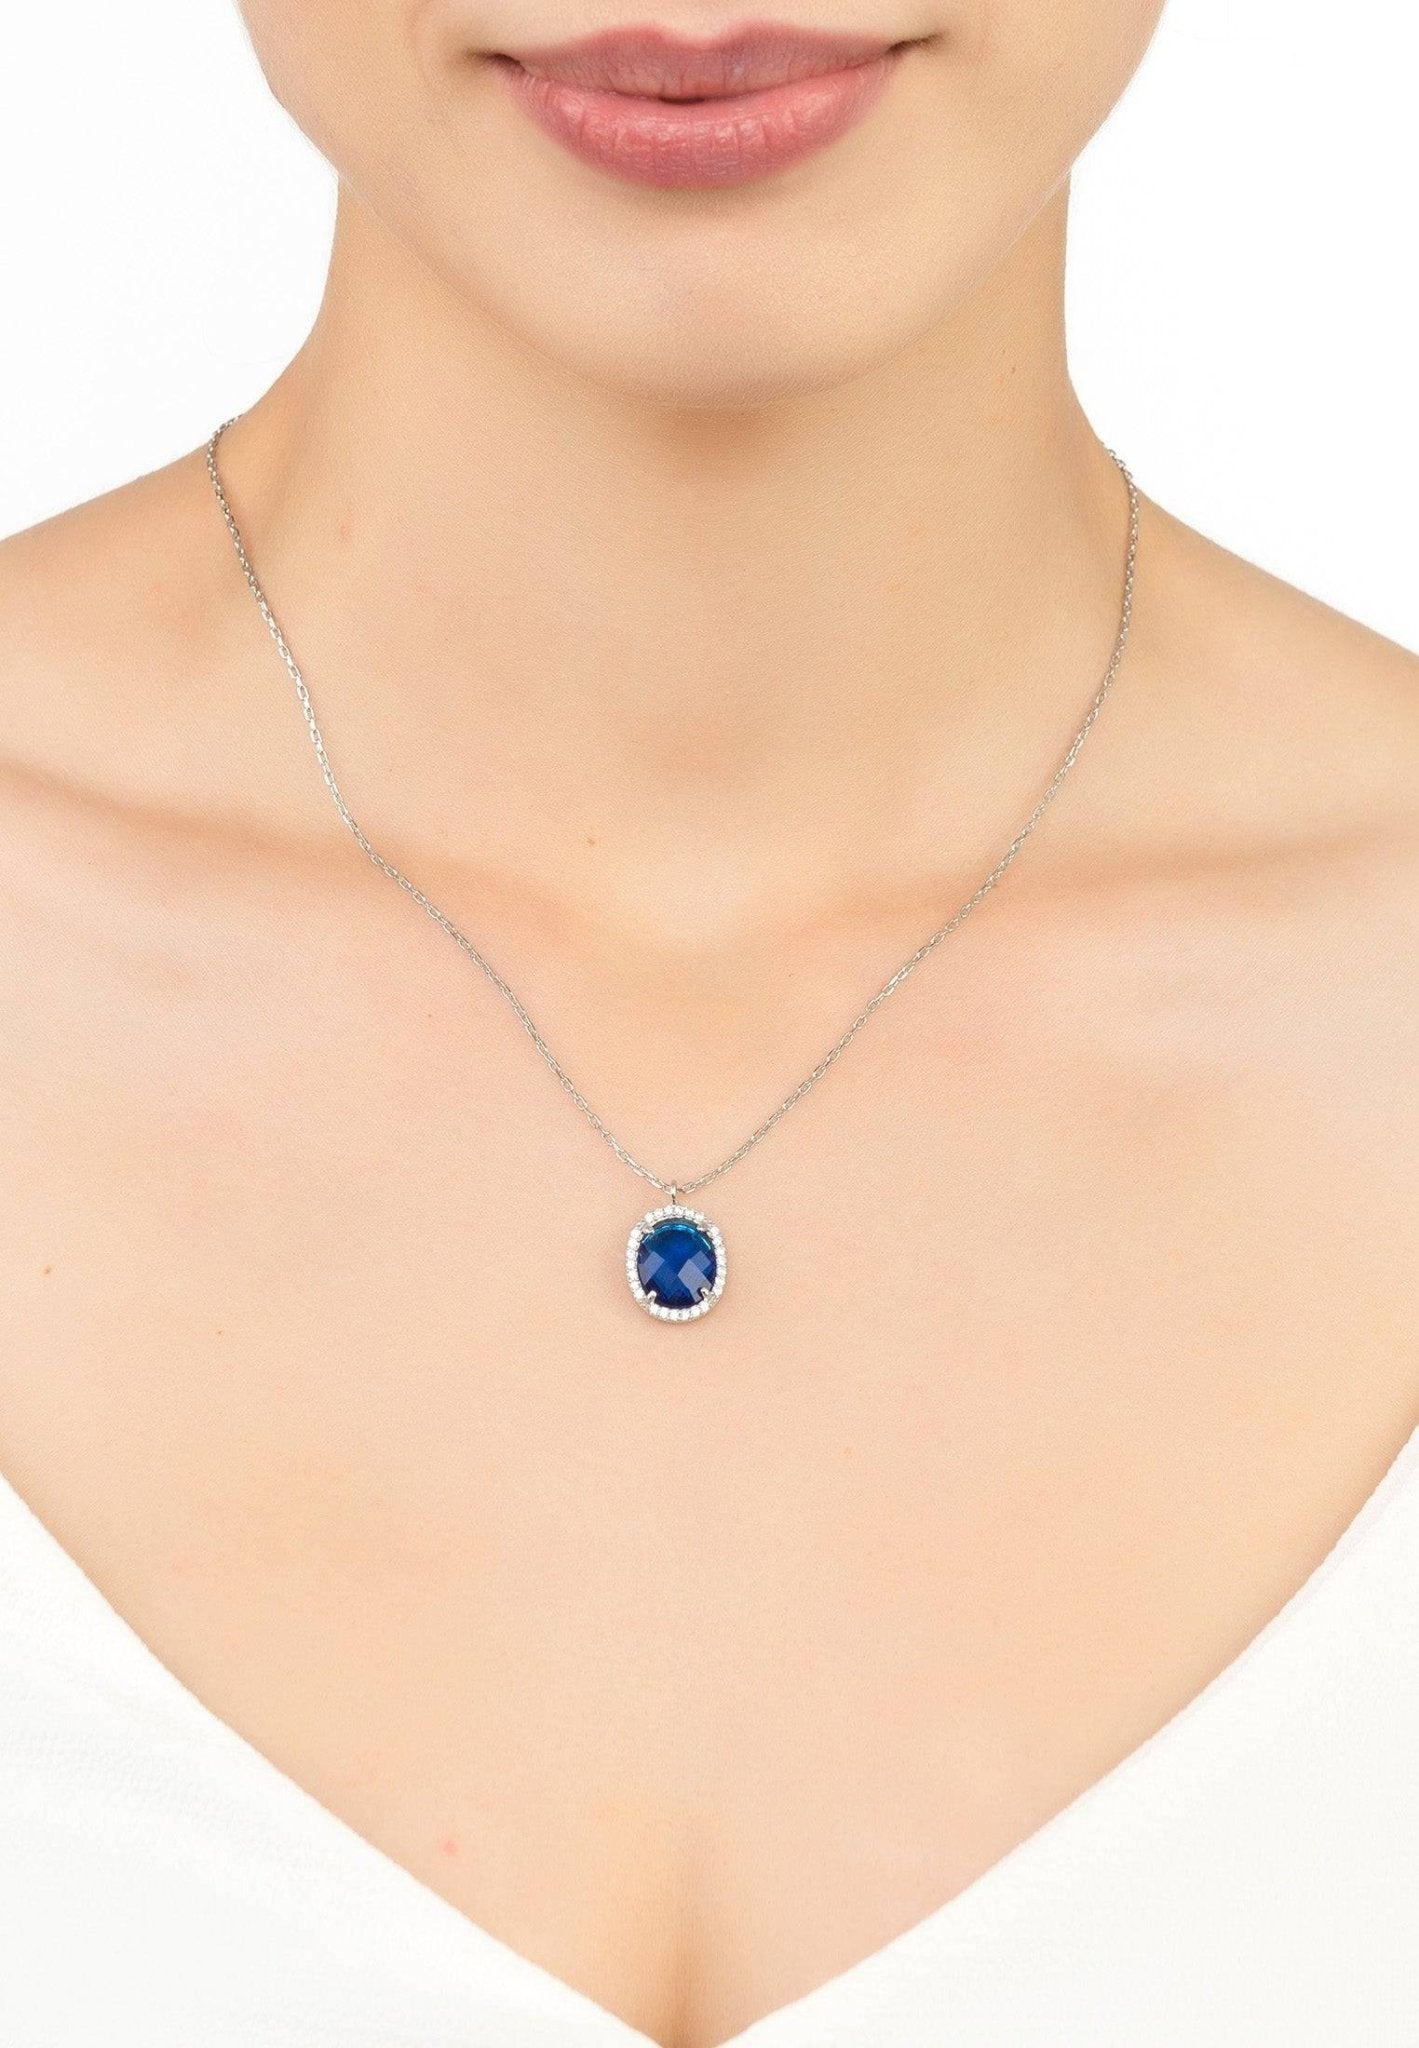 Beatrice Oval Gemstone Pendant Necklace Silver Sapphire Hydro - Allure SocietyNecklaces